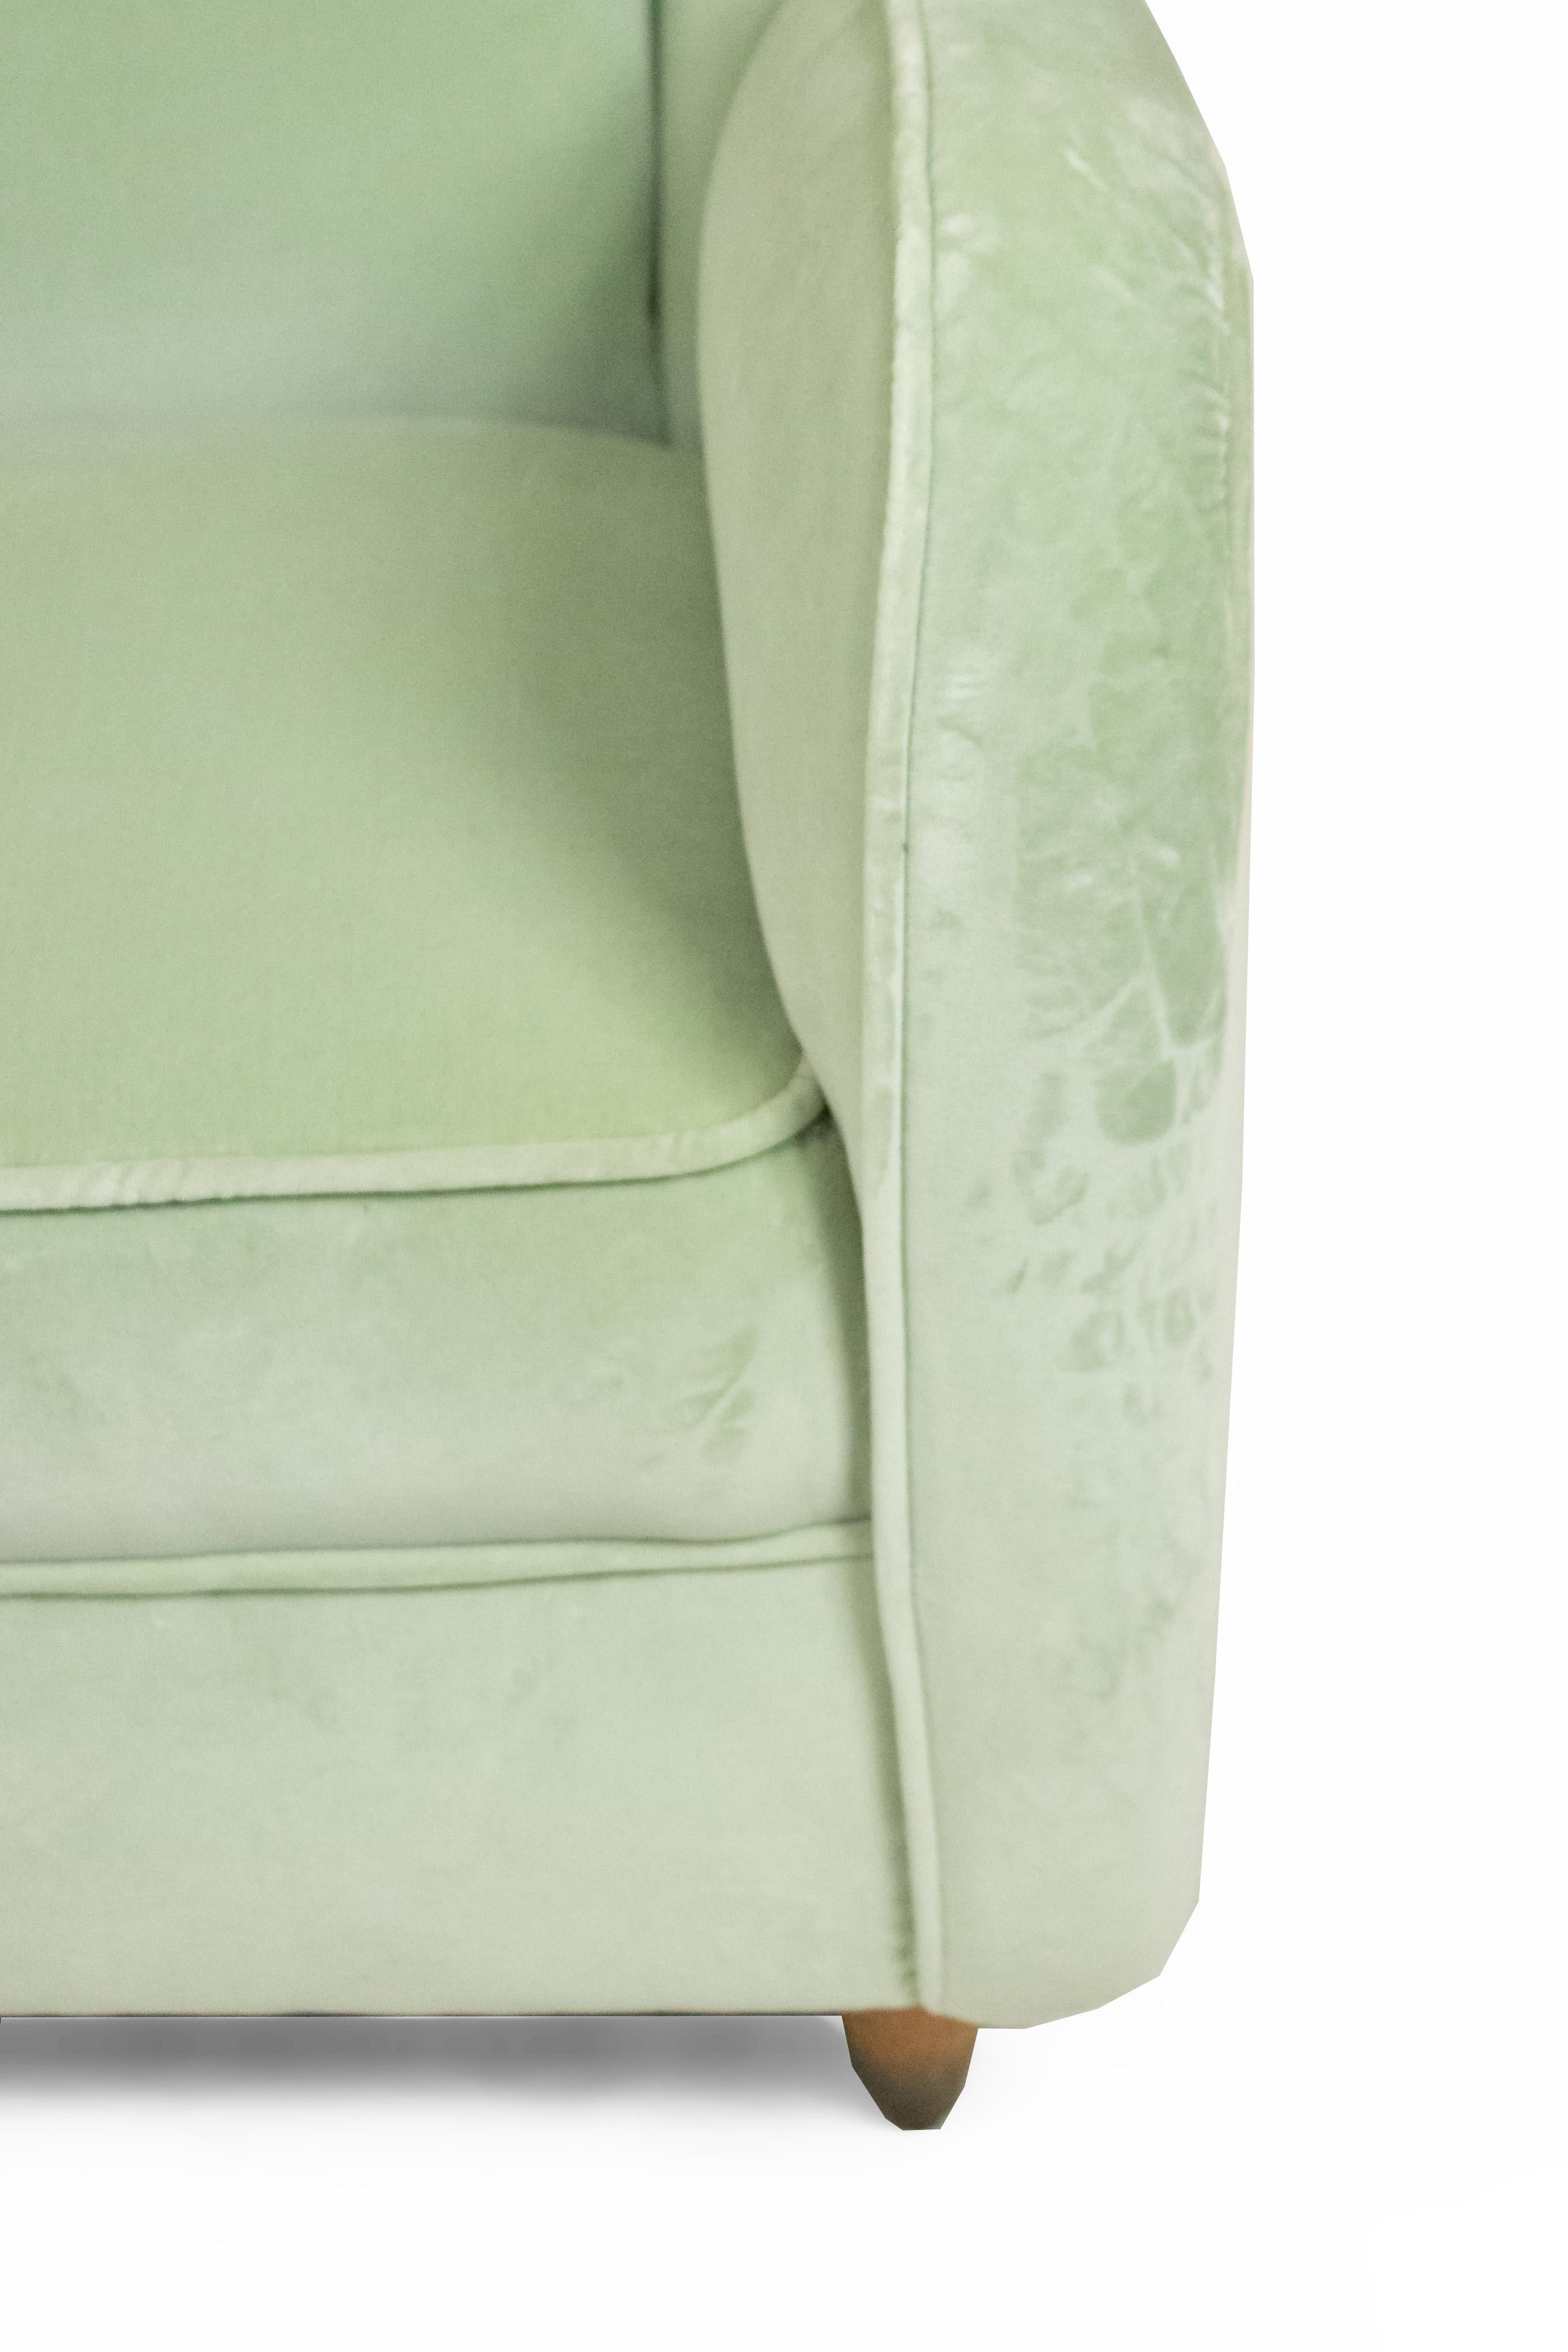 Mid-Century Modern Pair of Paolo Buffa Modernist Wingback Mint Green Velvet Armchairs For Sale